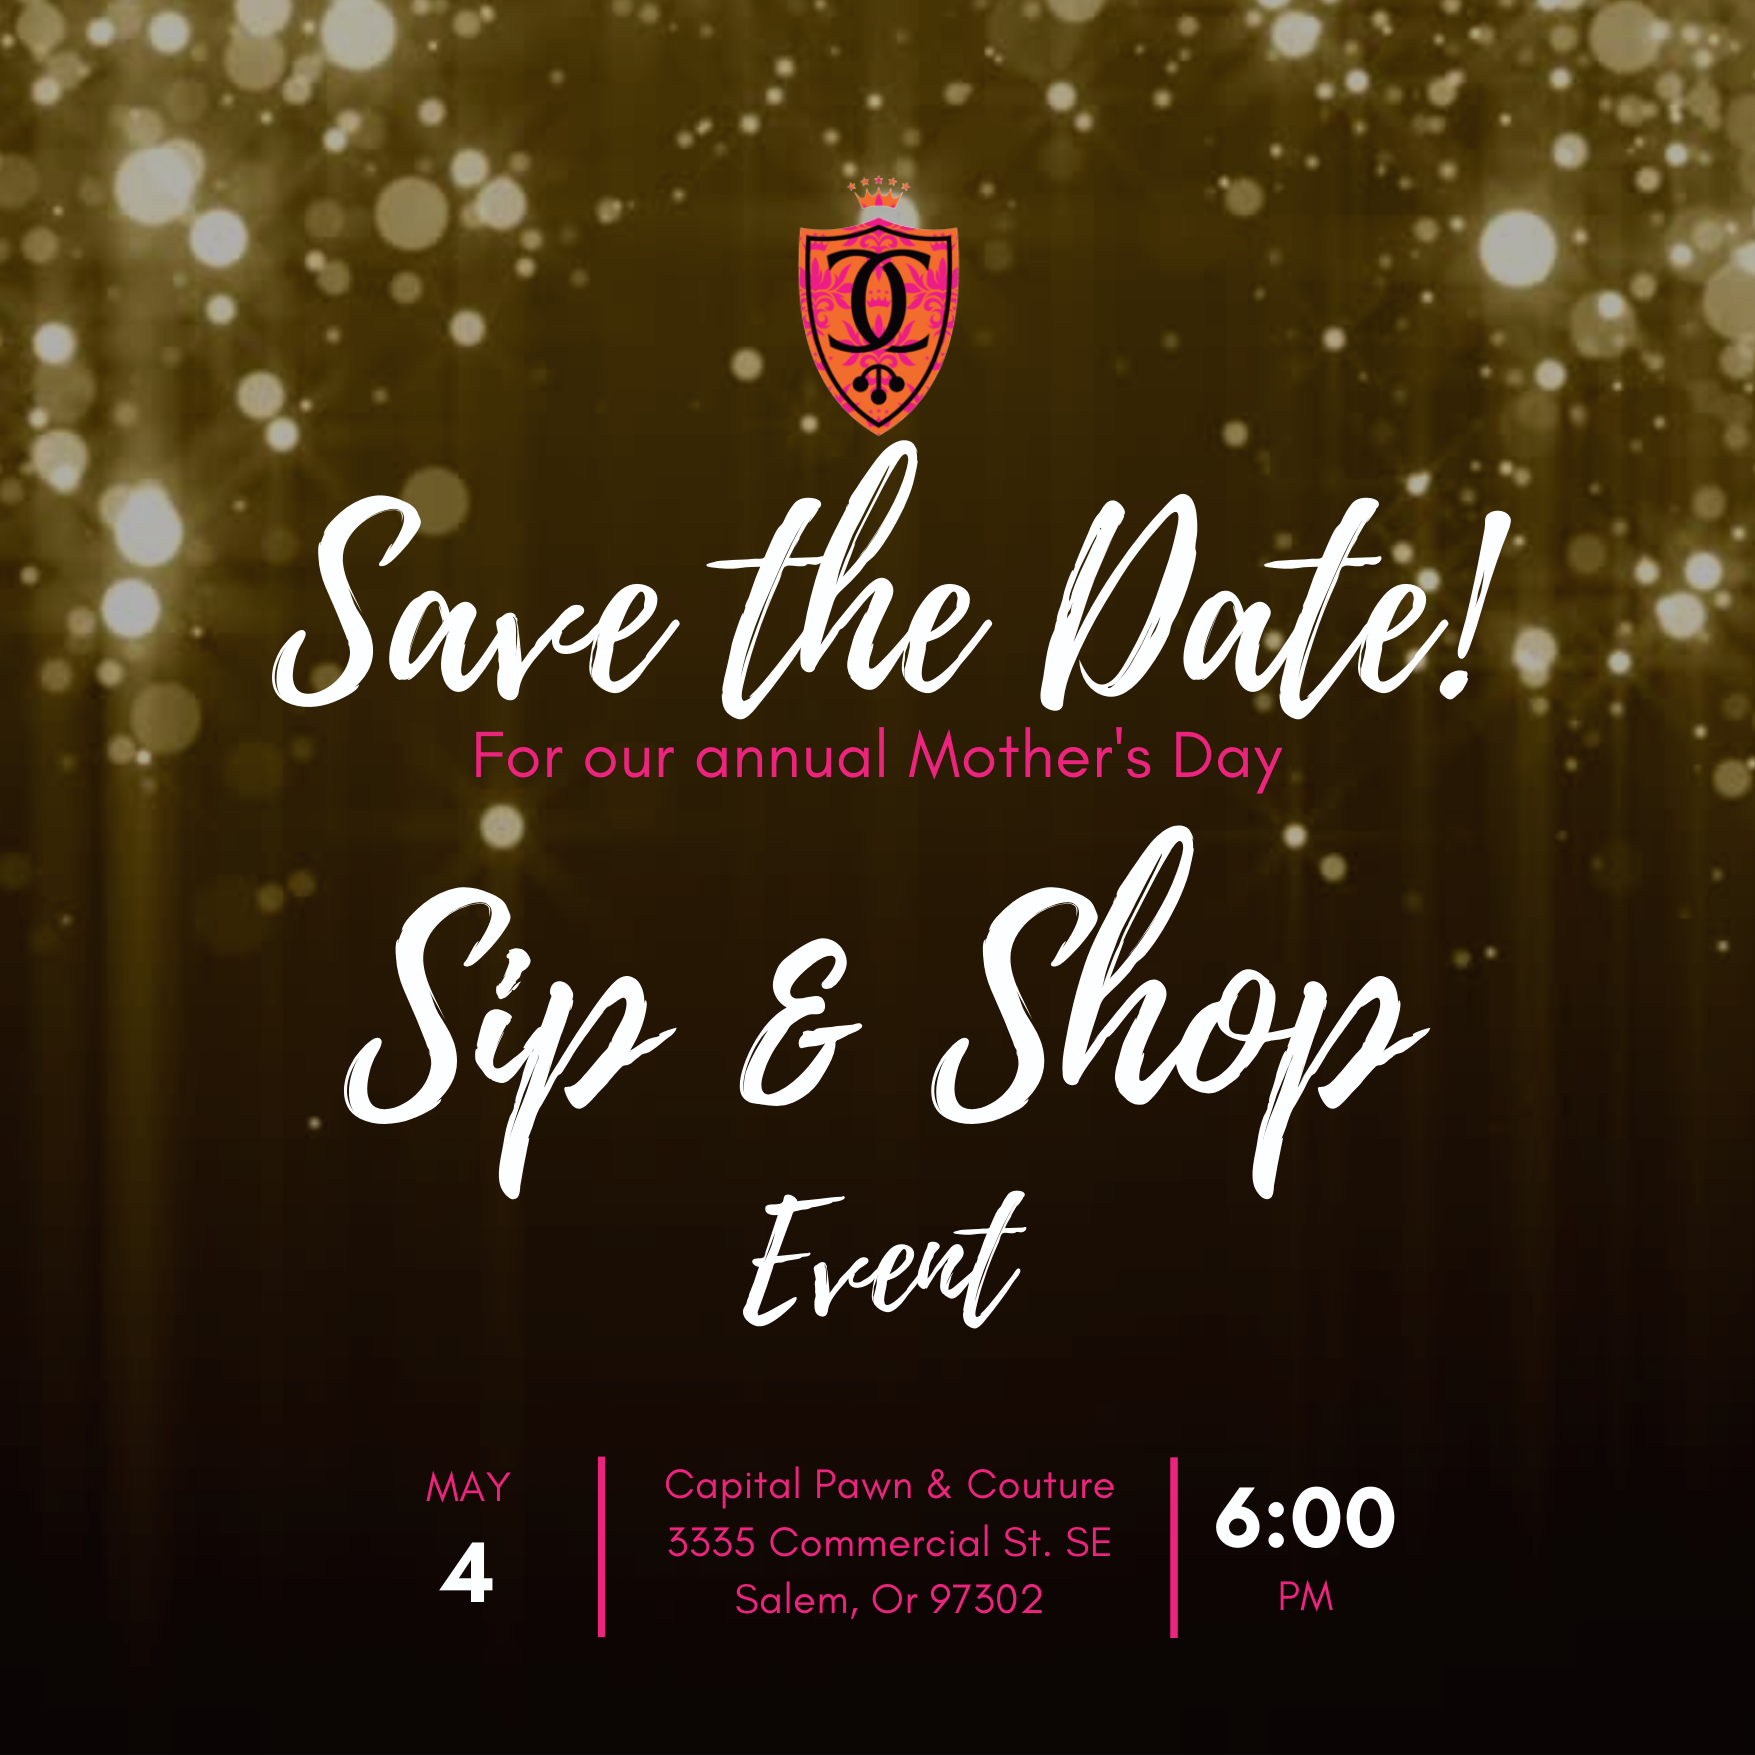 Capital Pawn & Couture’s Annual Mother’s Day Sip & Shop Event